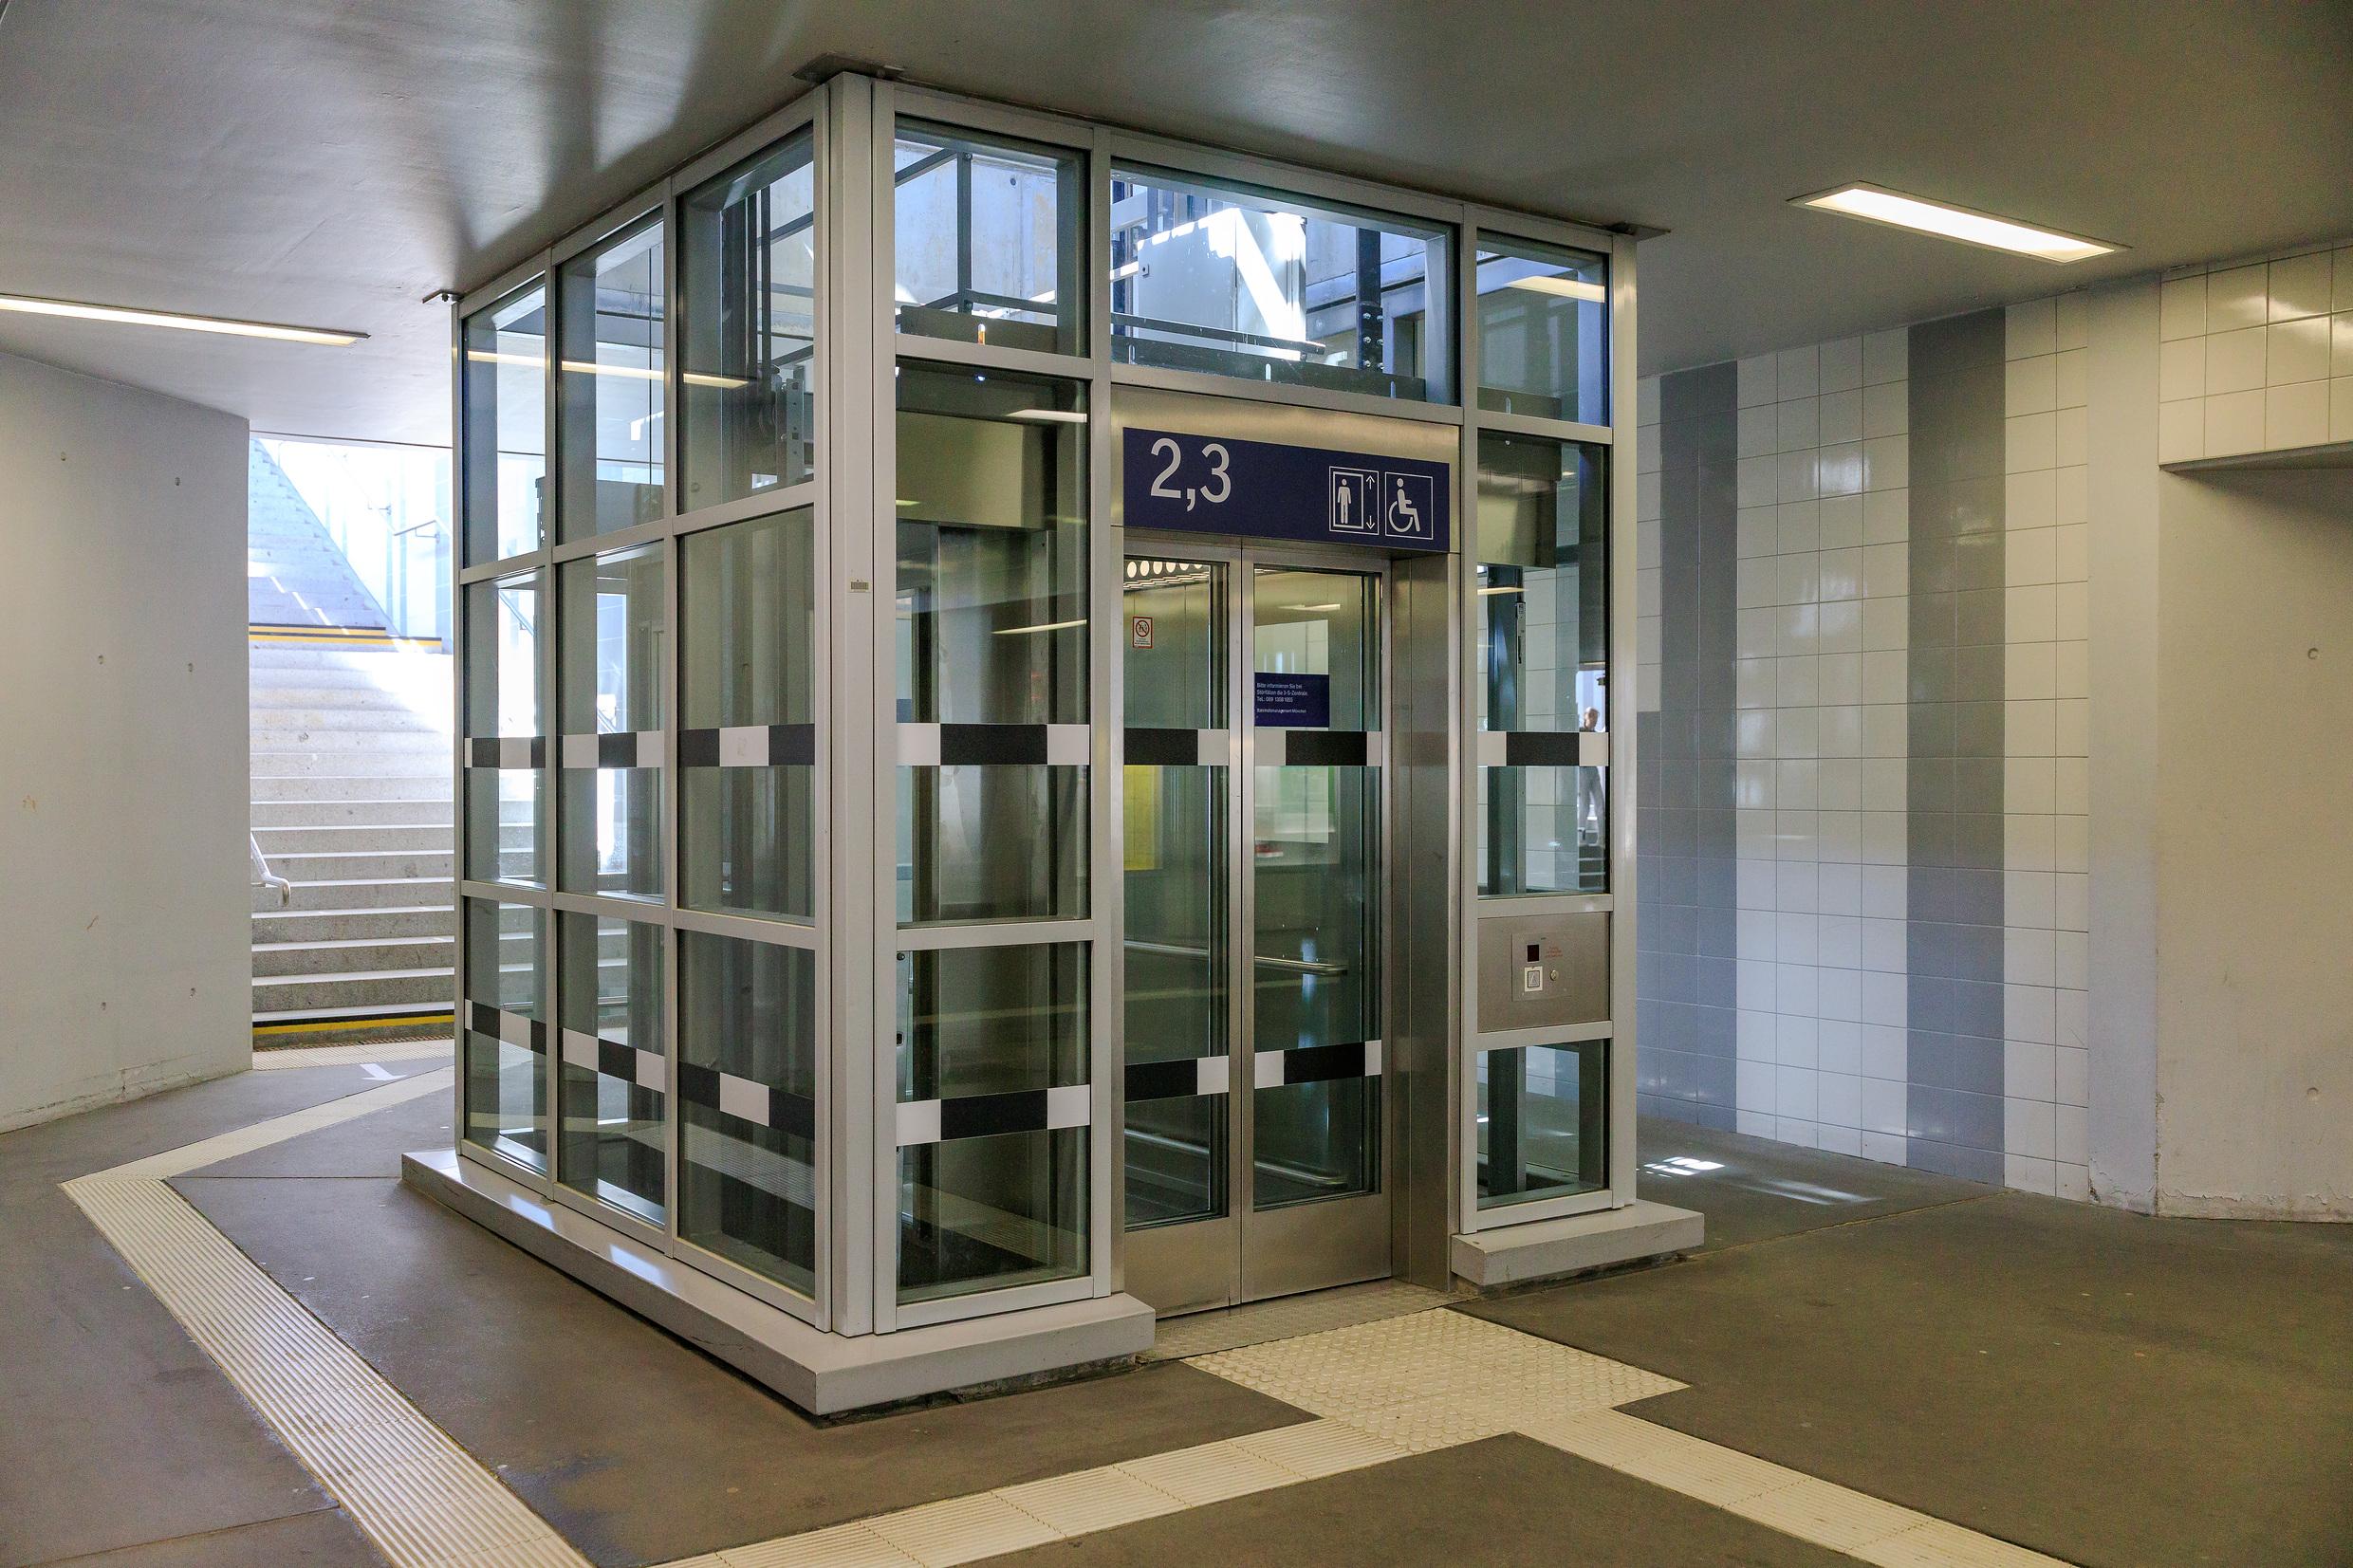 A lift in the passenger underpass of a station.